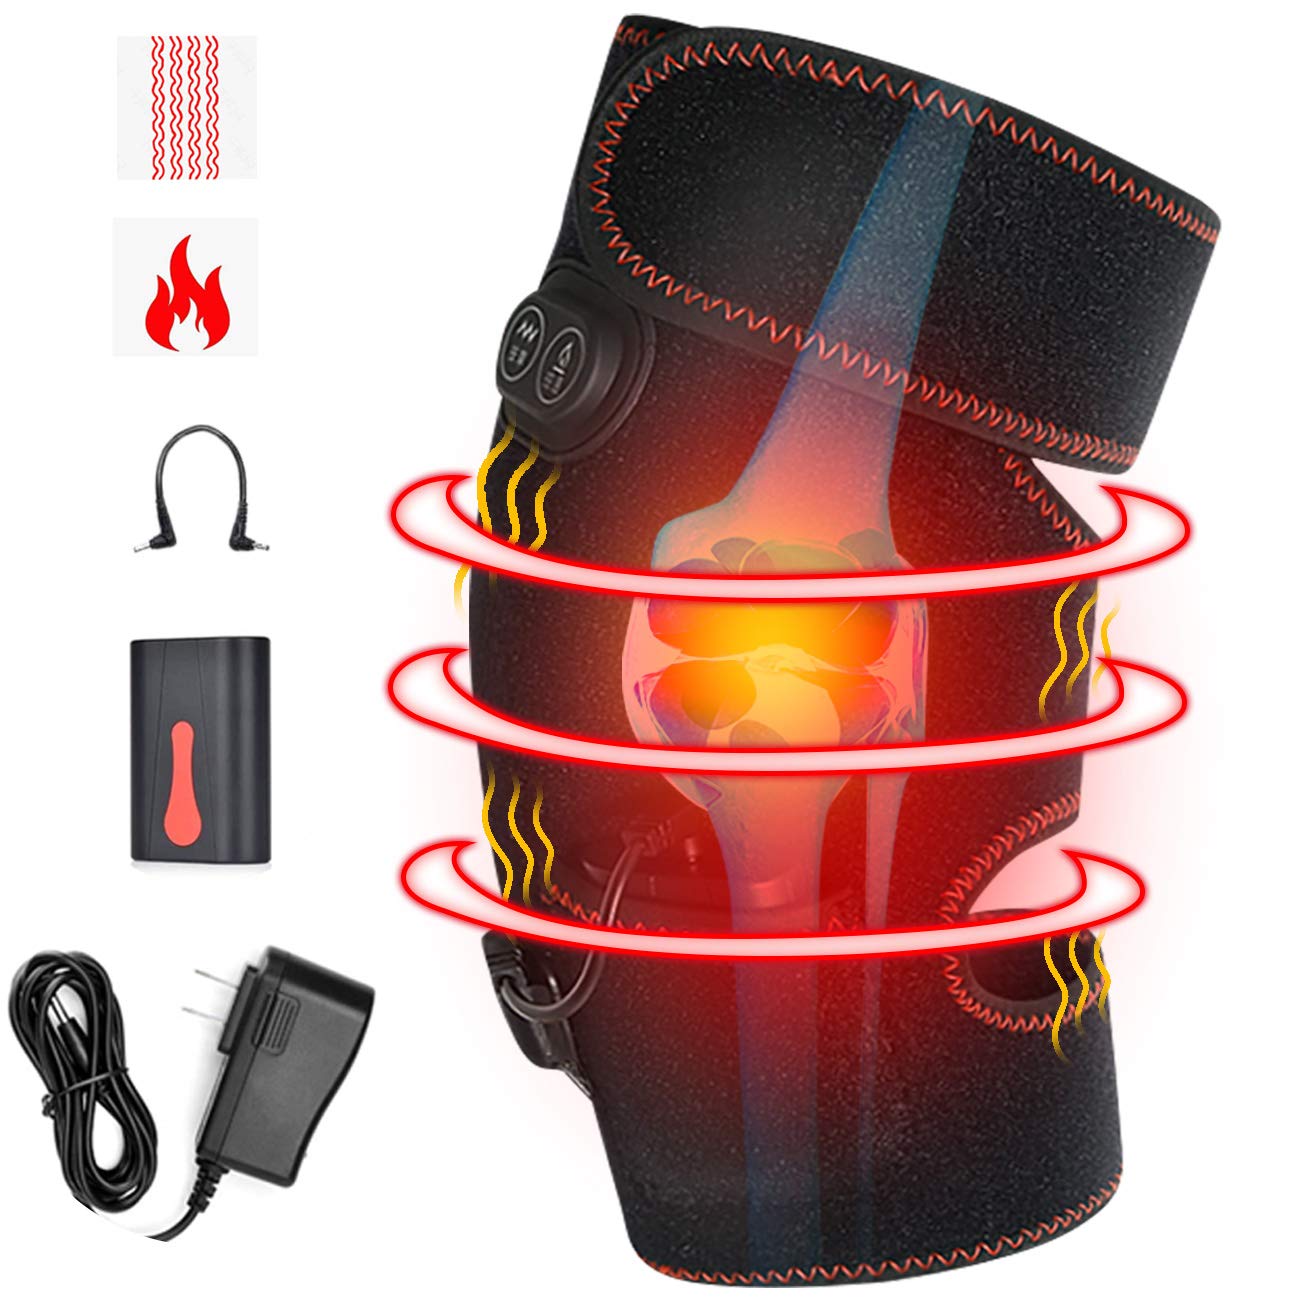 Heated Knee Massager For Pain Relief - Vibration Knee Massager for